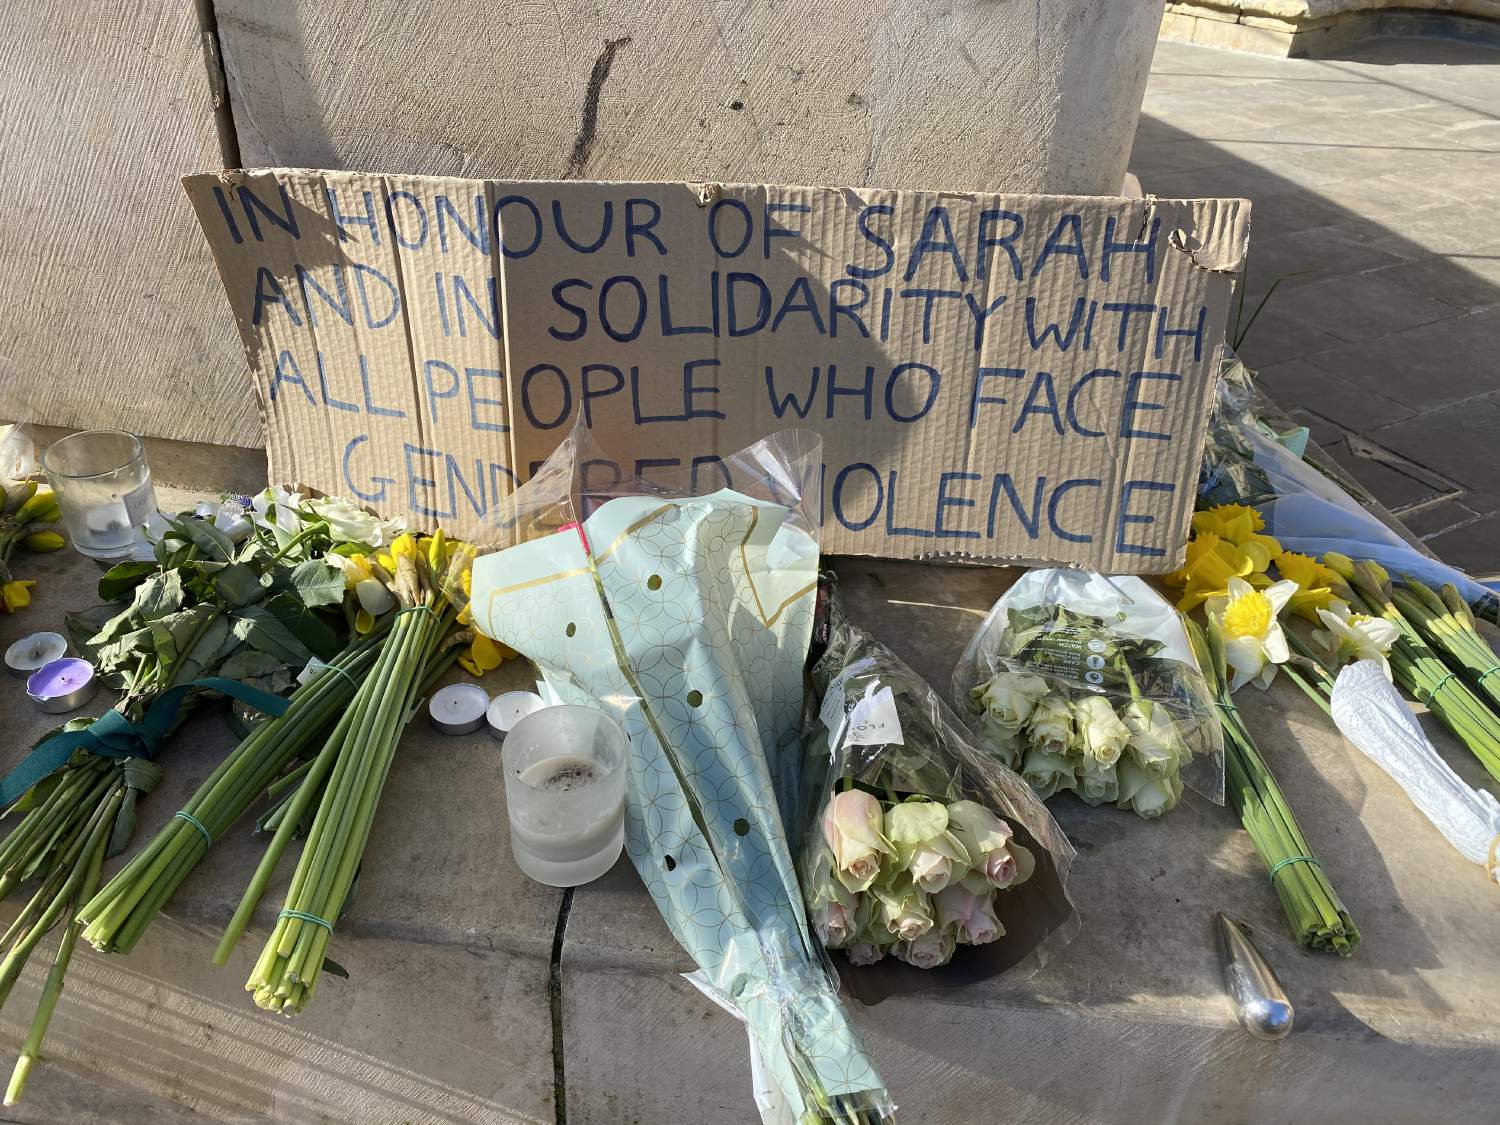 Sarah Everard's tragic death reminds us of the dangers of misogyny